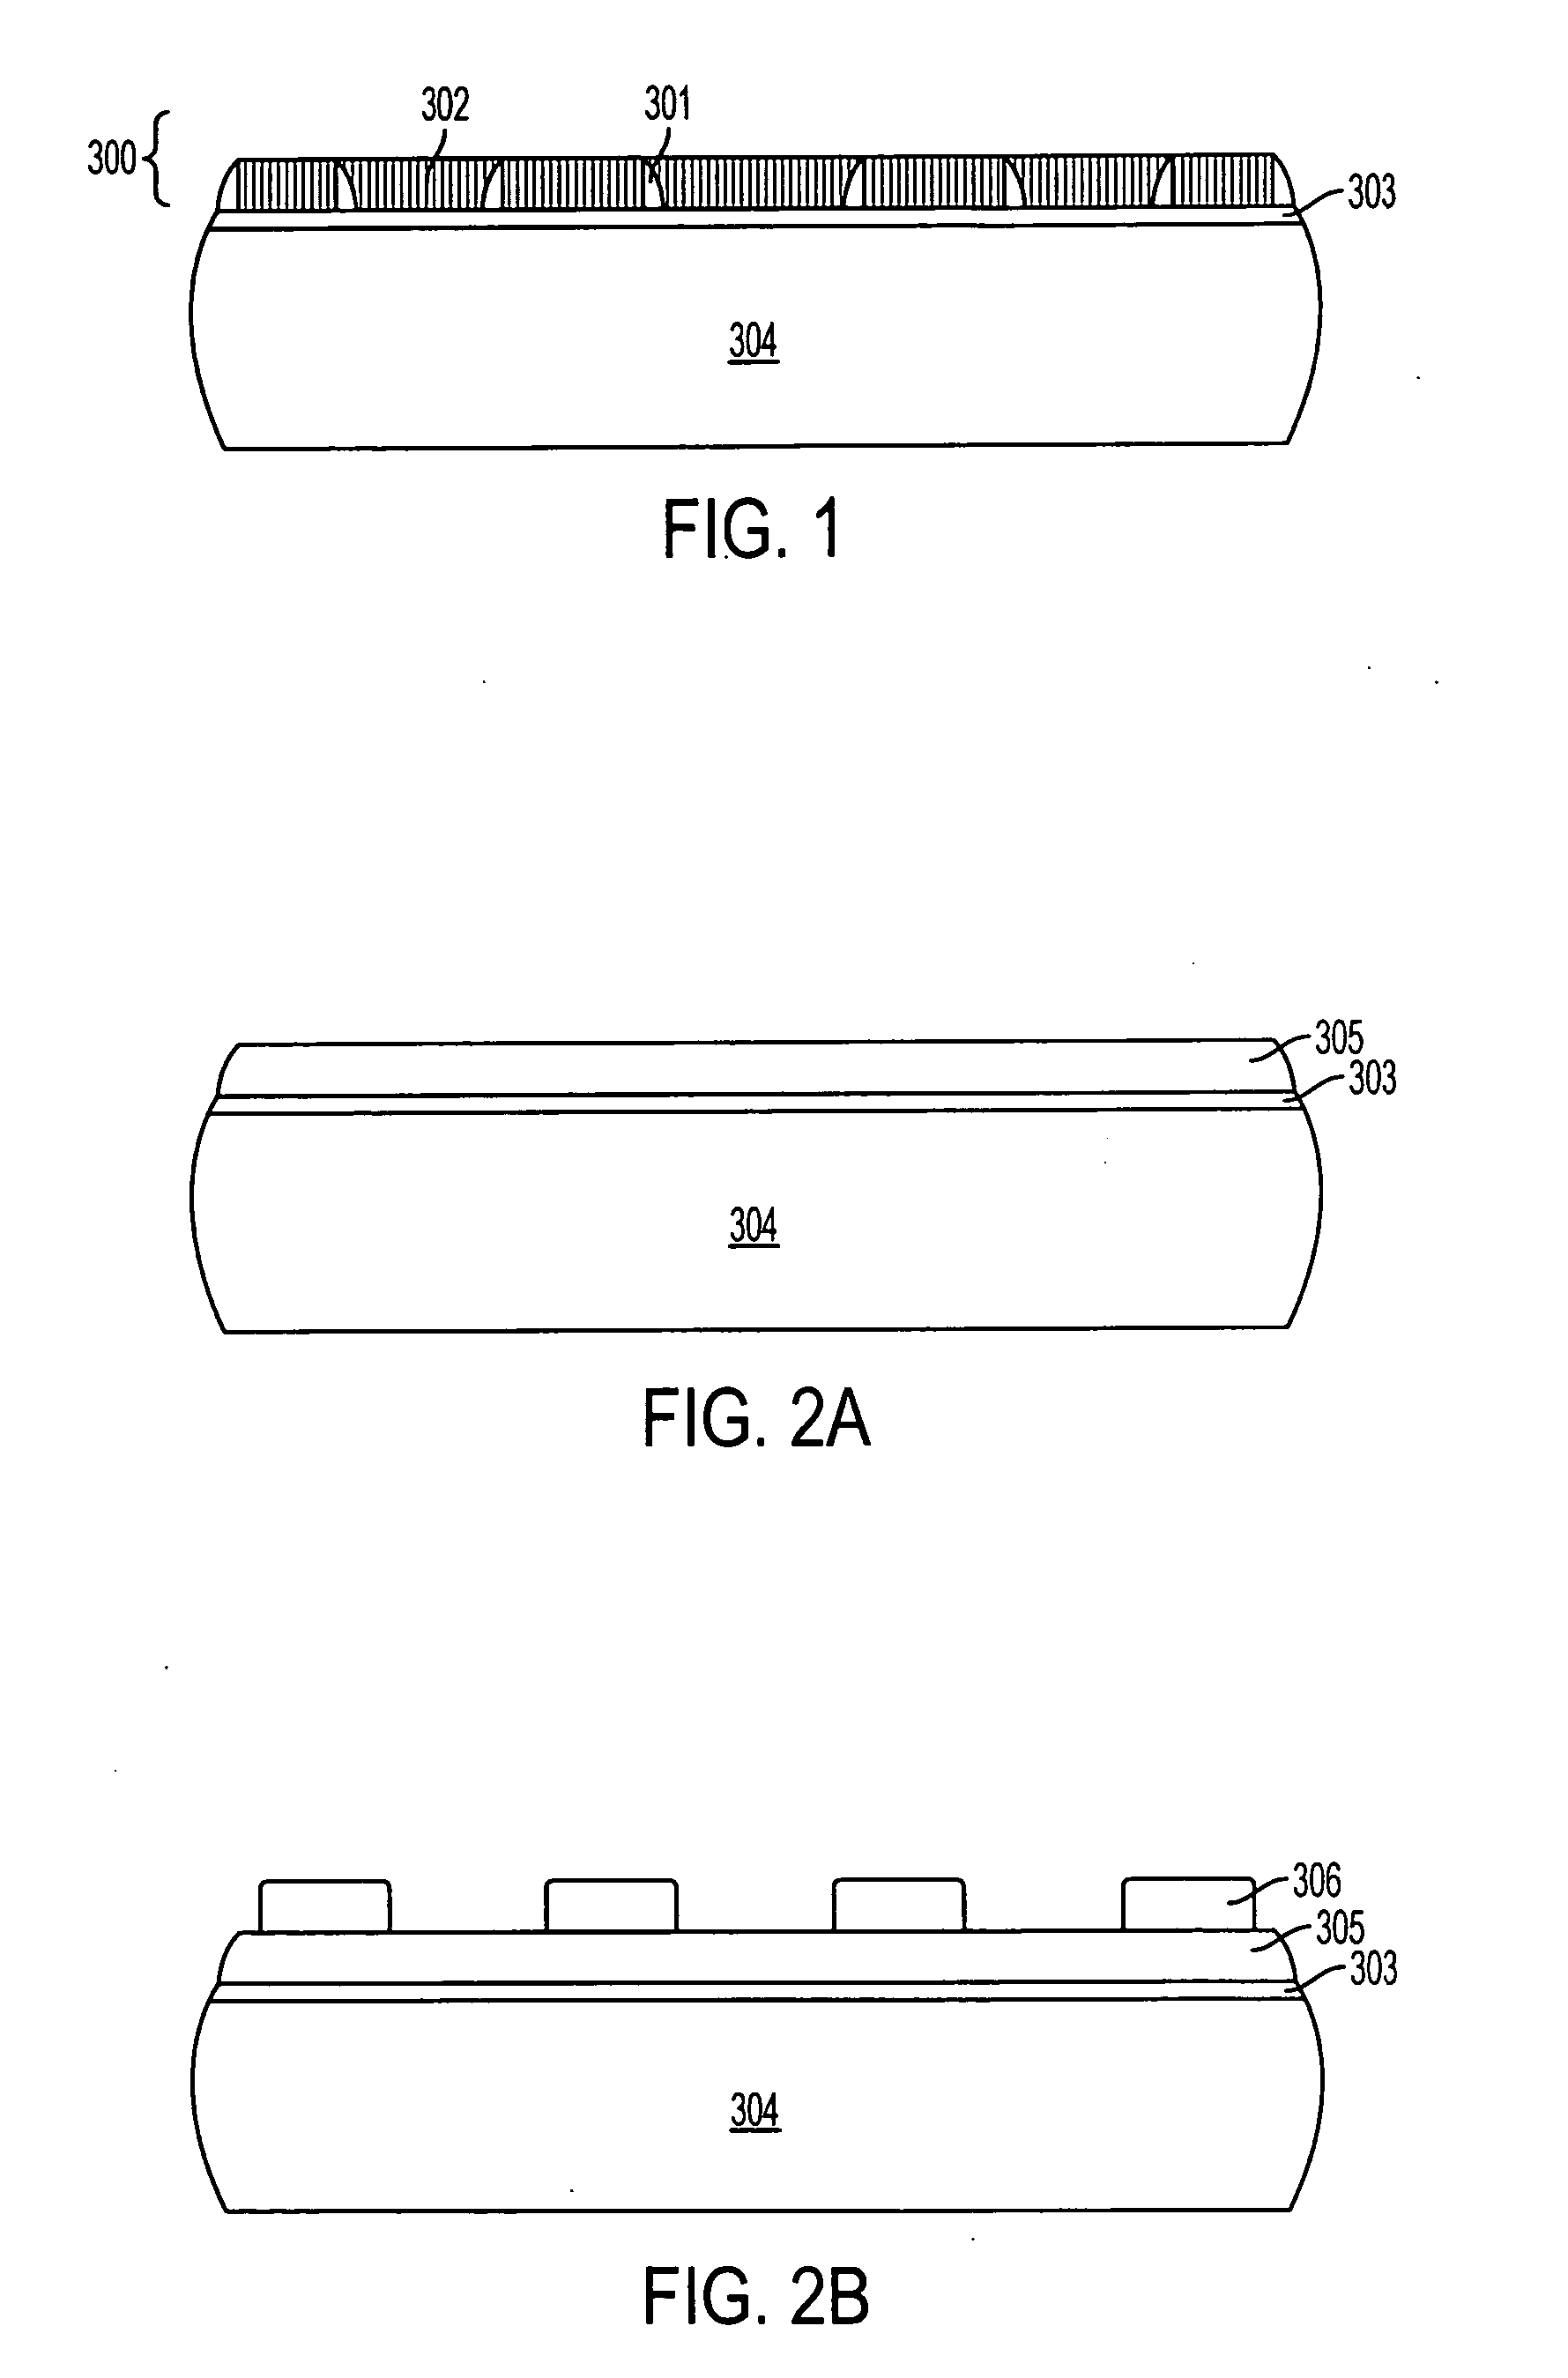 Method and apparatus defining a color filter array for an image sensor